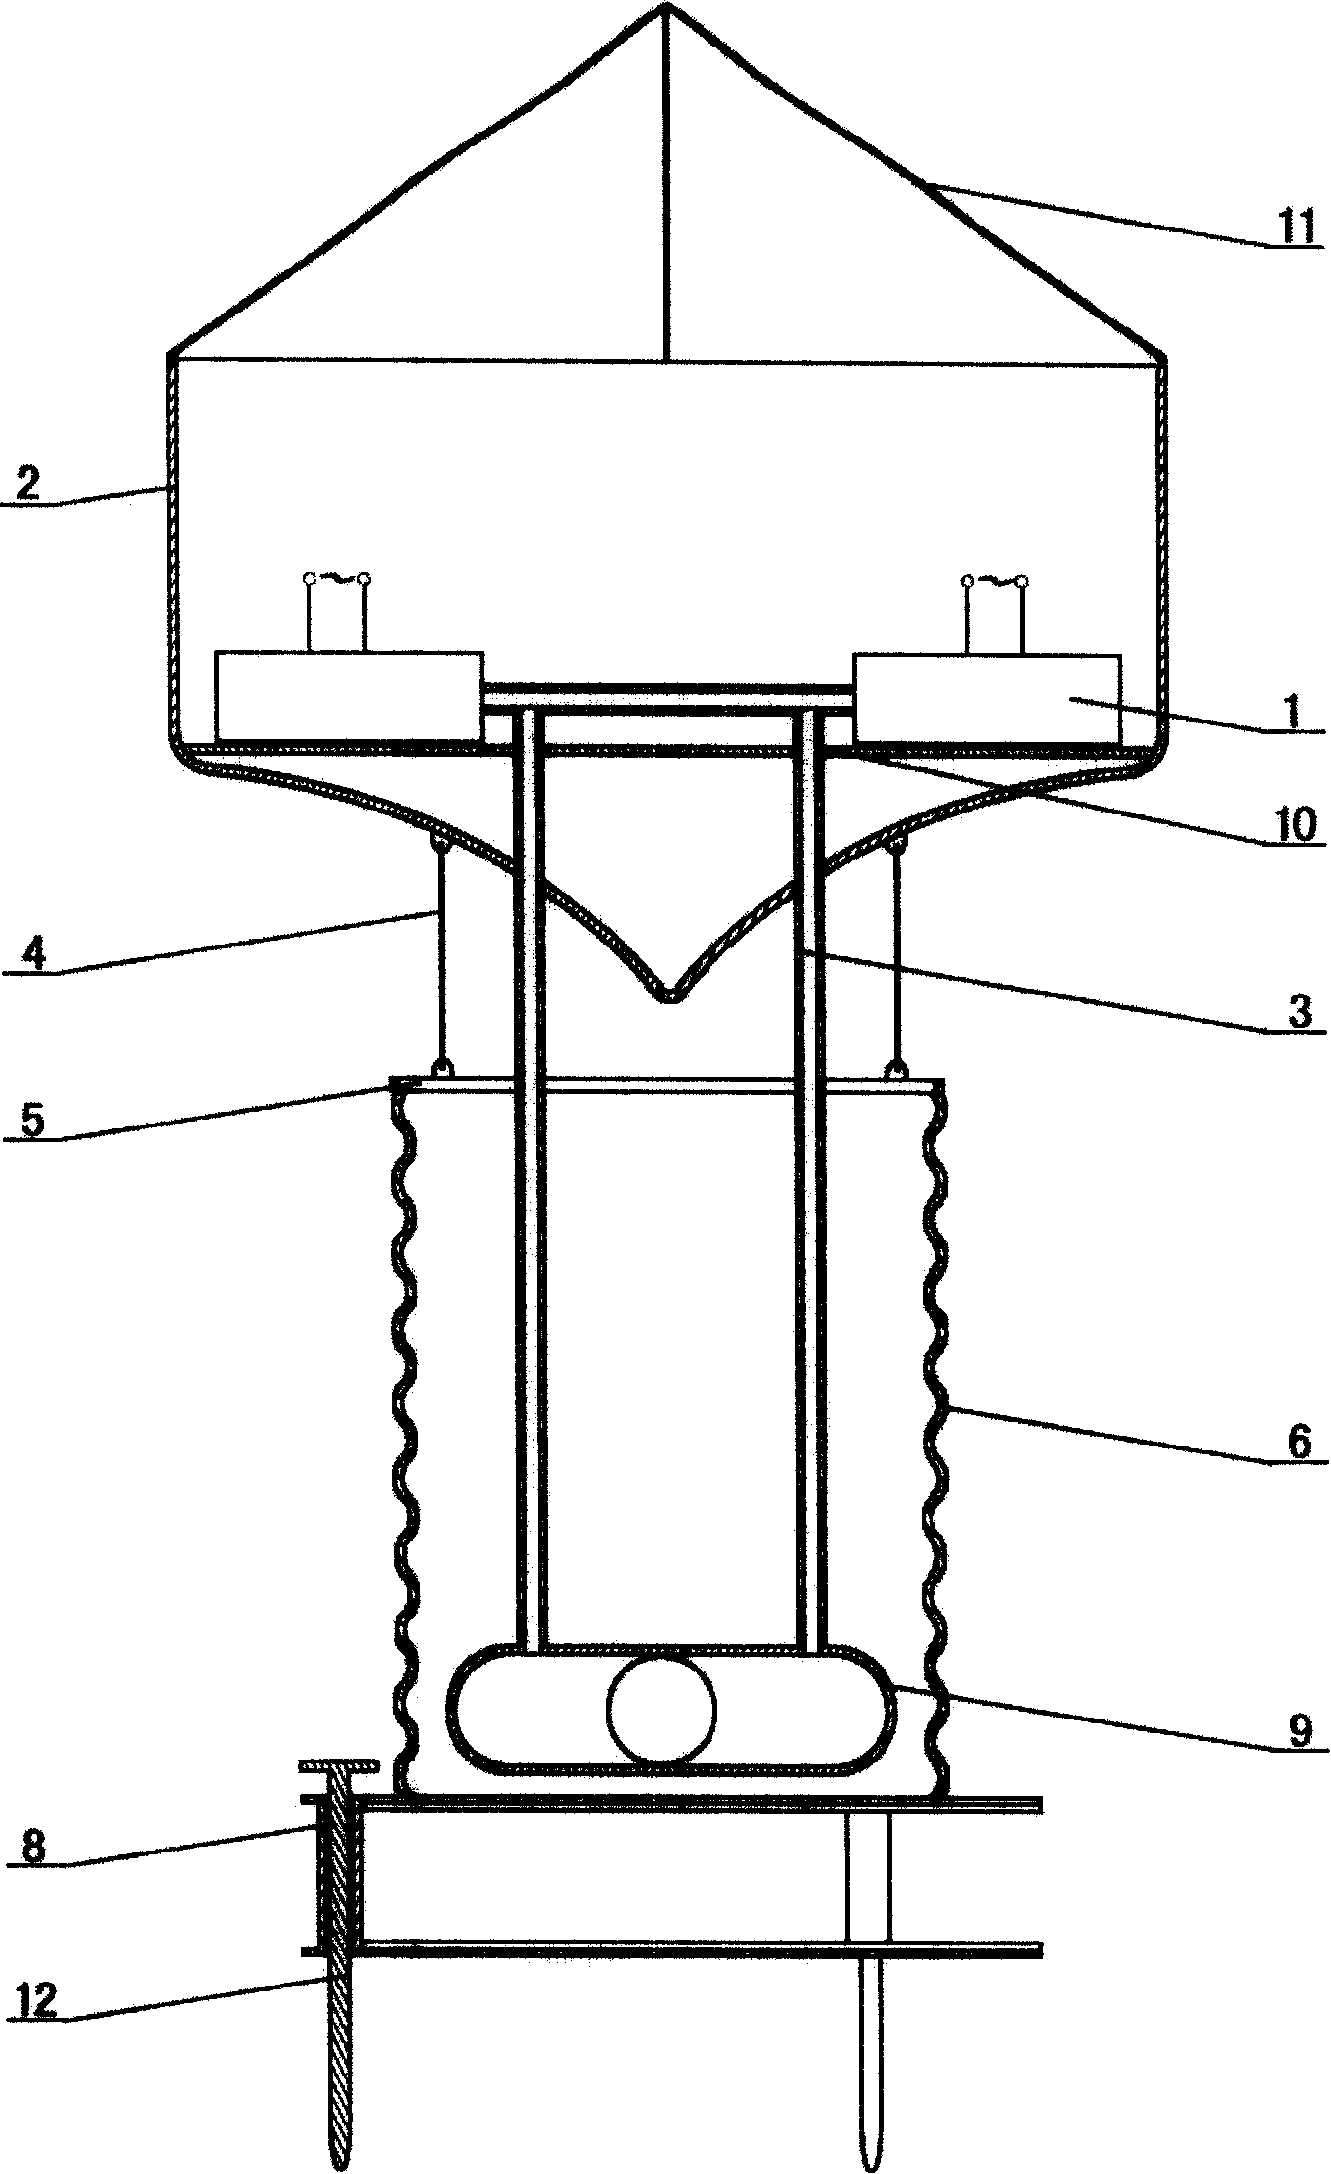 Aeration flow guiding water circulation treatment device